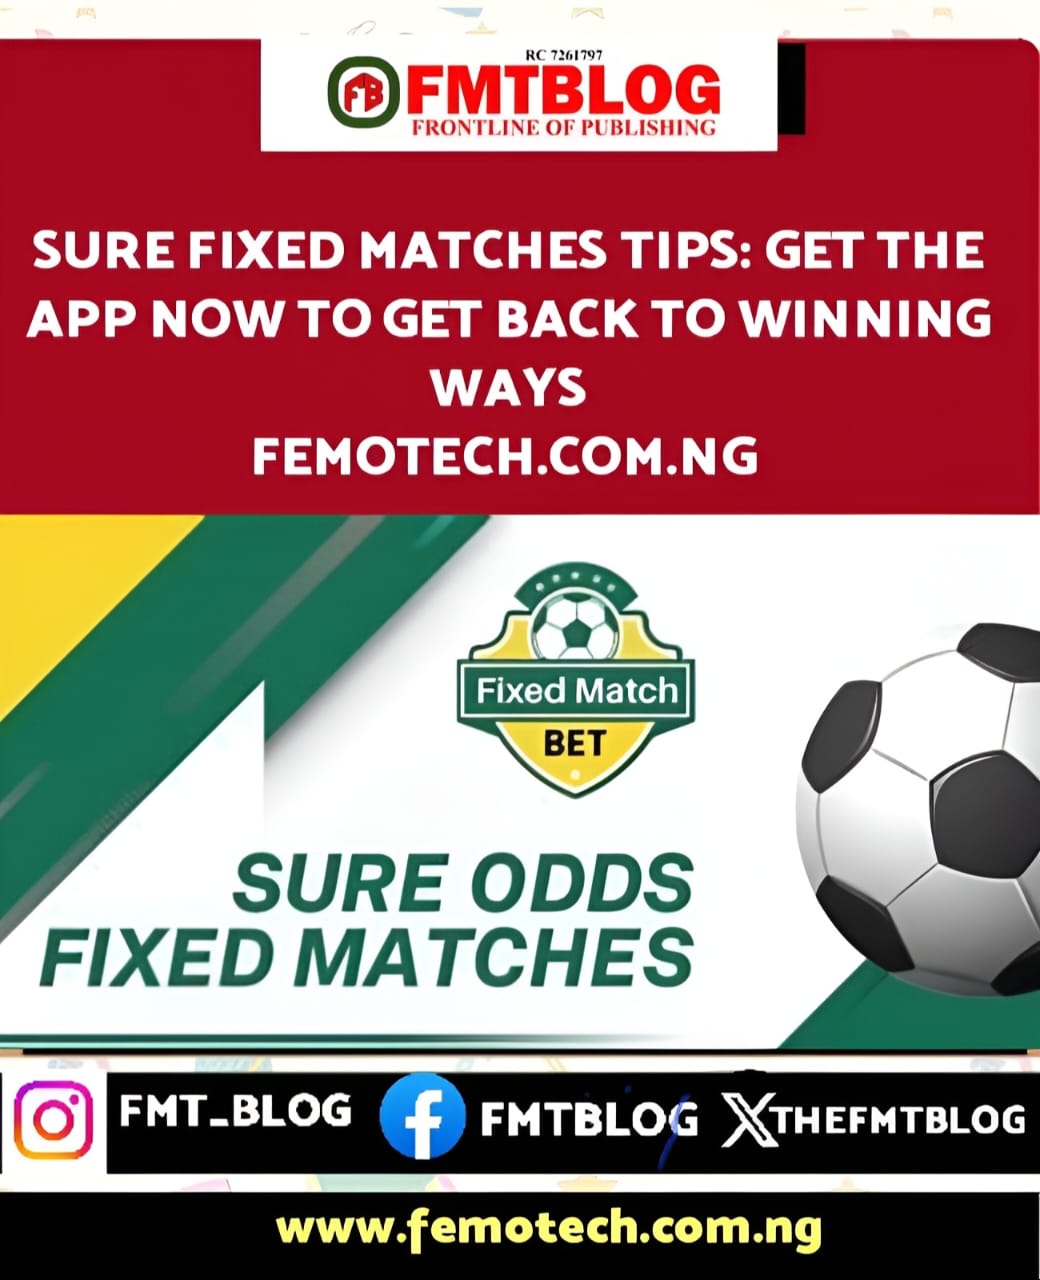 Sure Fixed Matches Tips: Get The App Now To Get Back To Winning Ways